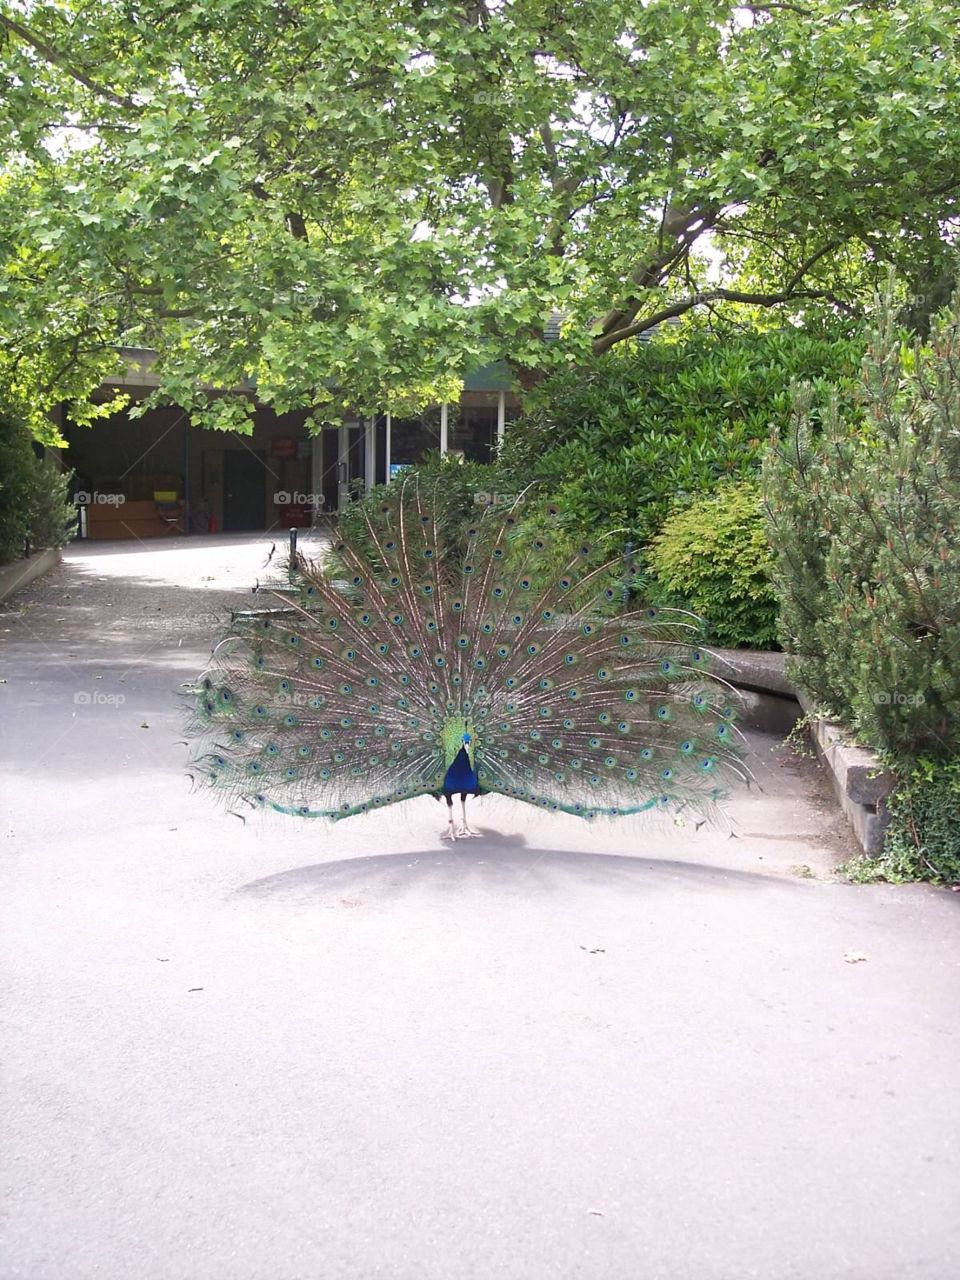 Peacock. Peacock at the zoo